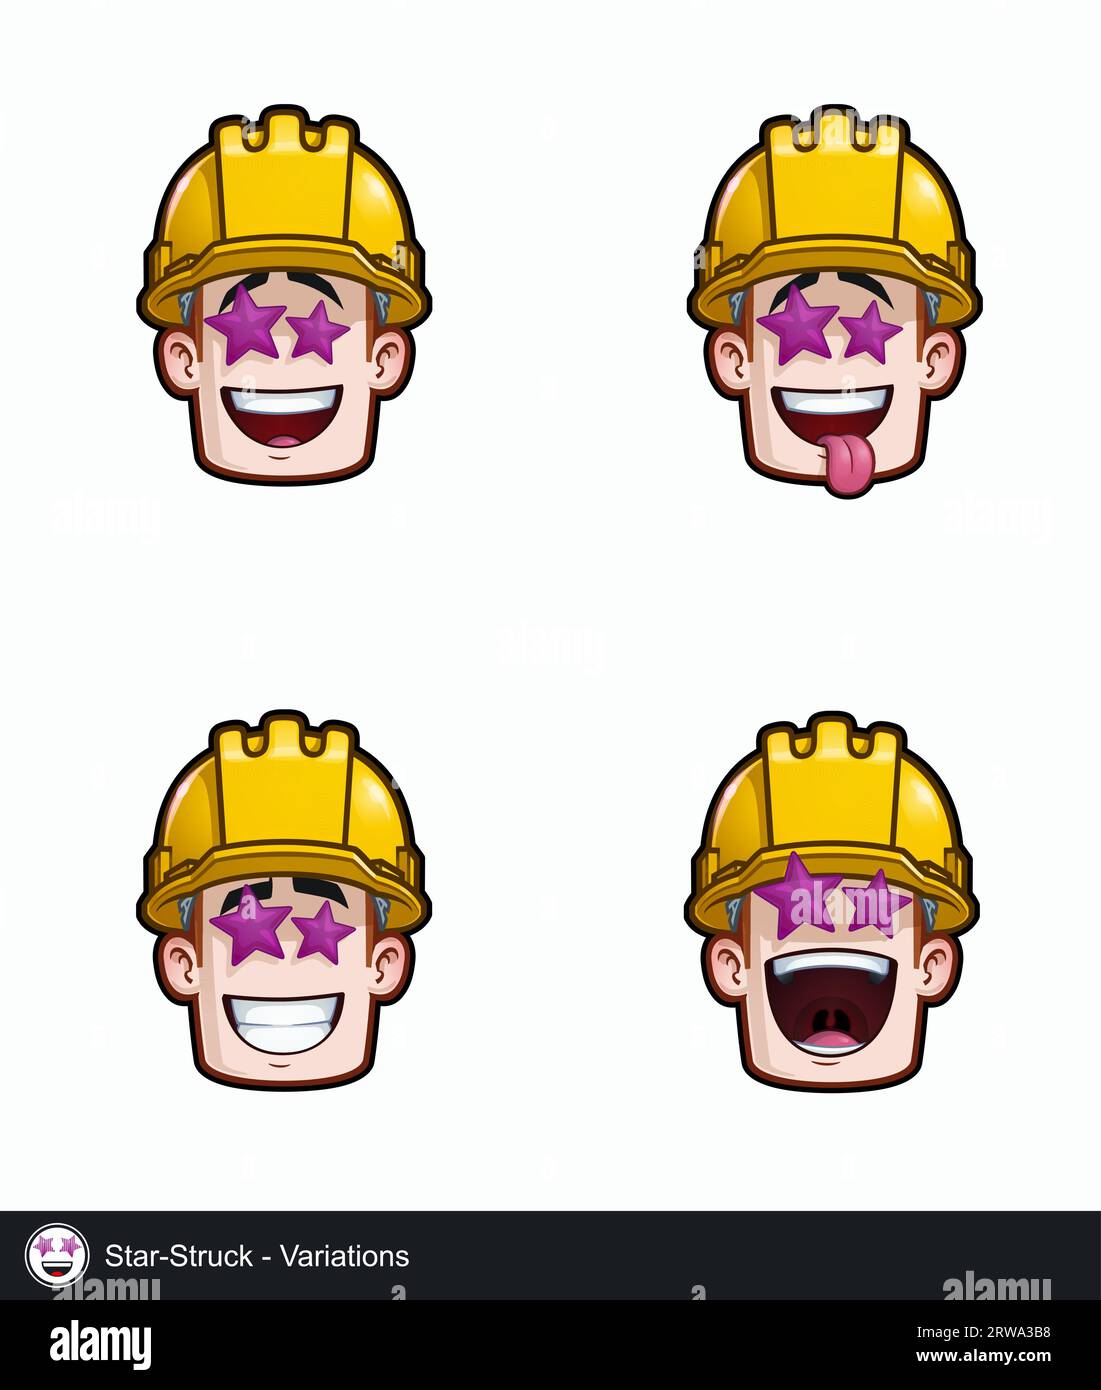 Icon set of a construction worker face with Star Struck emotional expression variations. All elements neatly on well described layers and groups. Stock Vector